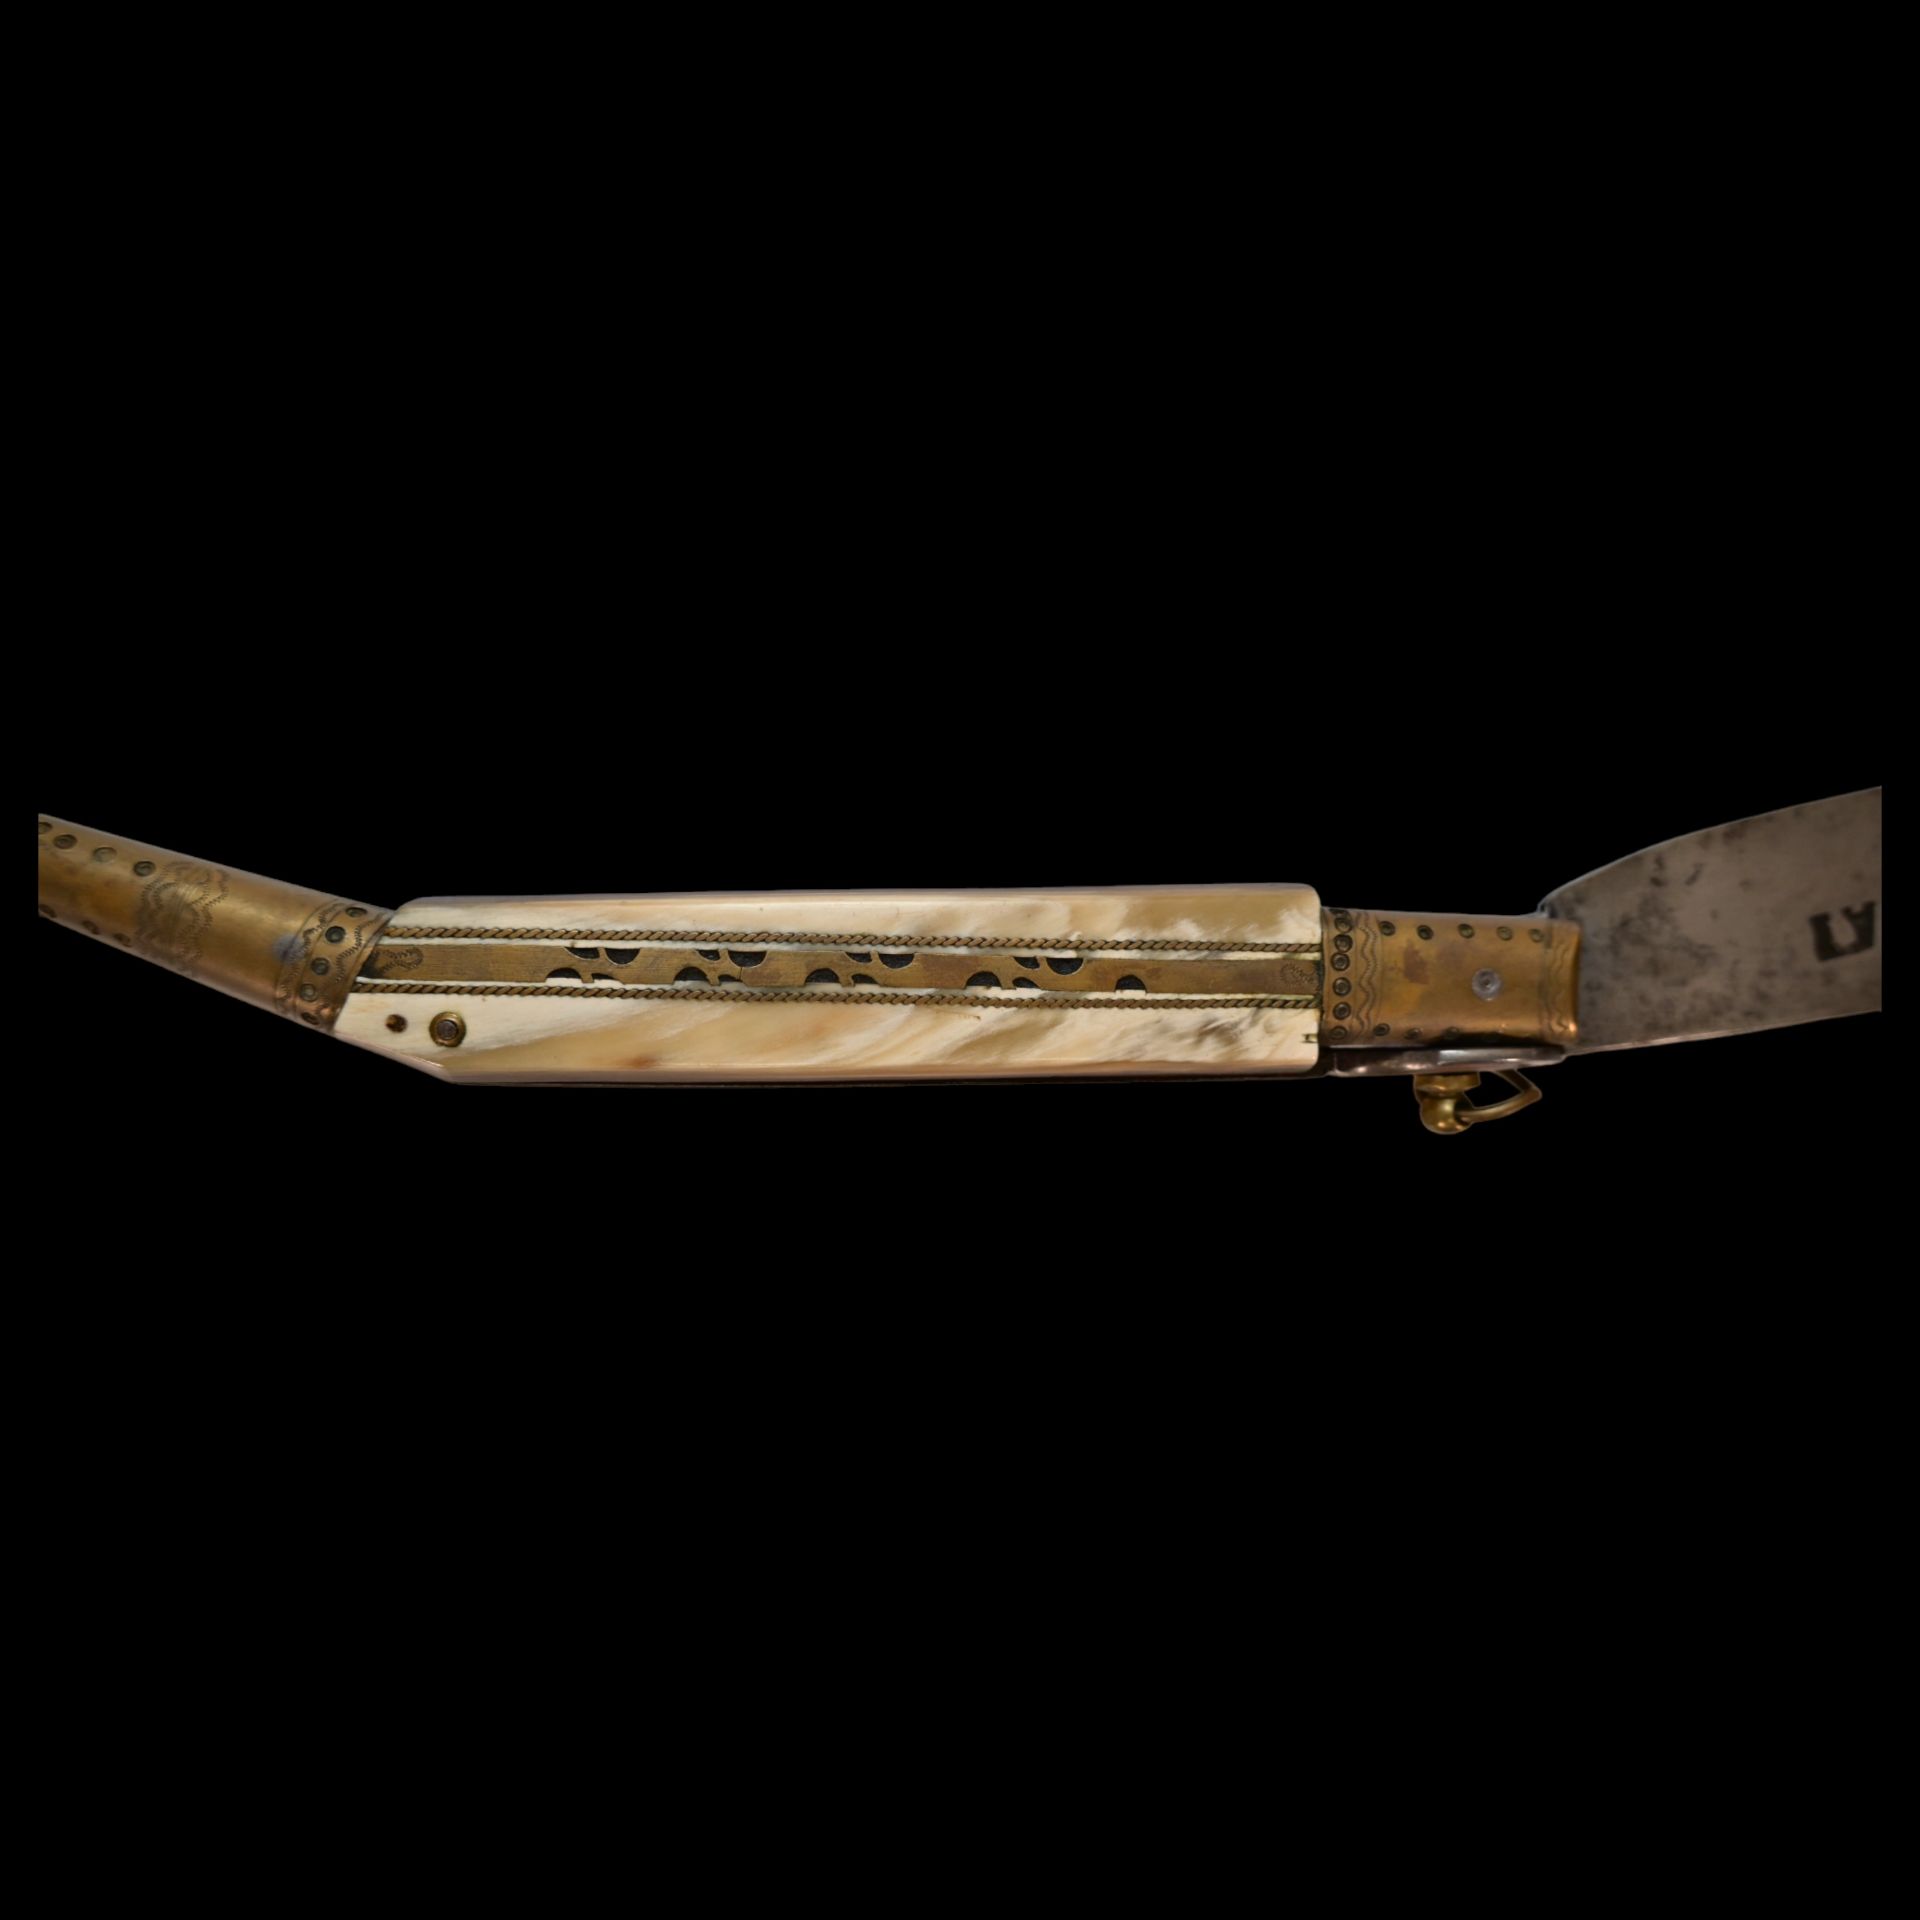 A large Spanish navaja, circa 1900. The steel blade is decorated with engraving. - Image 5 of 8